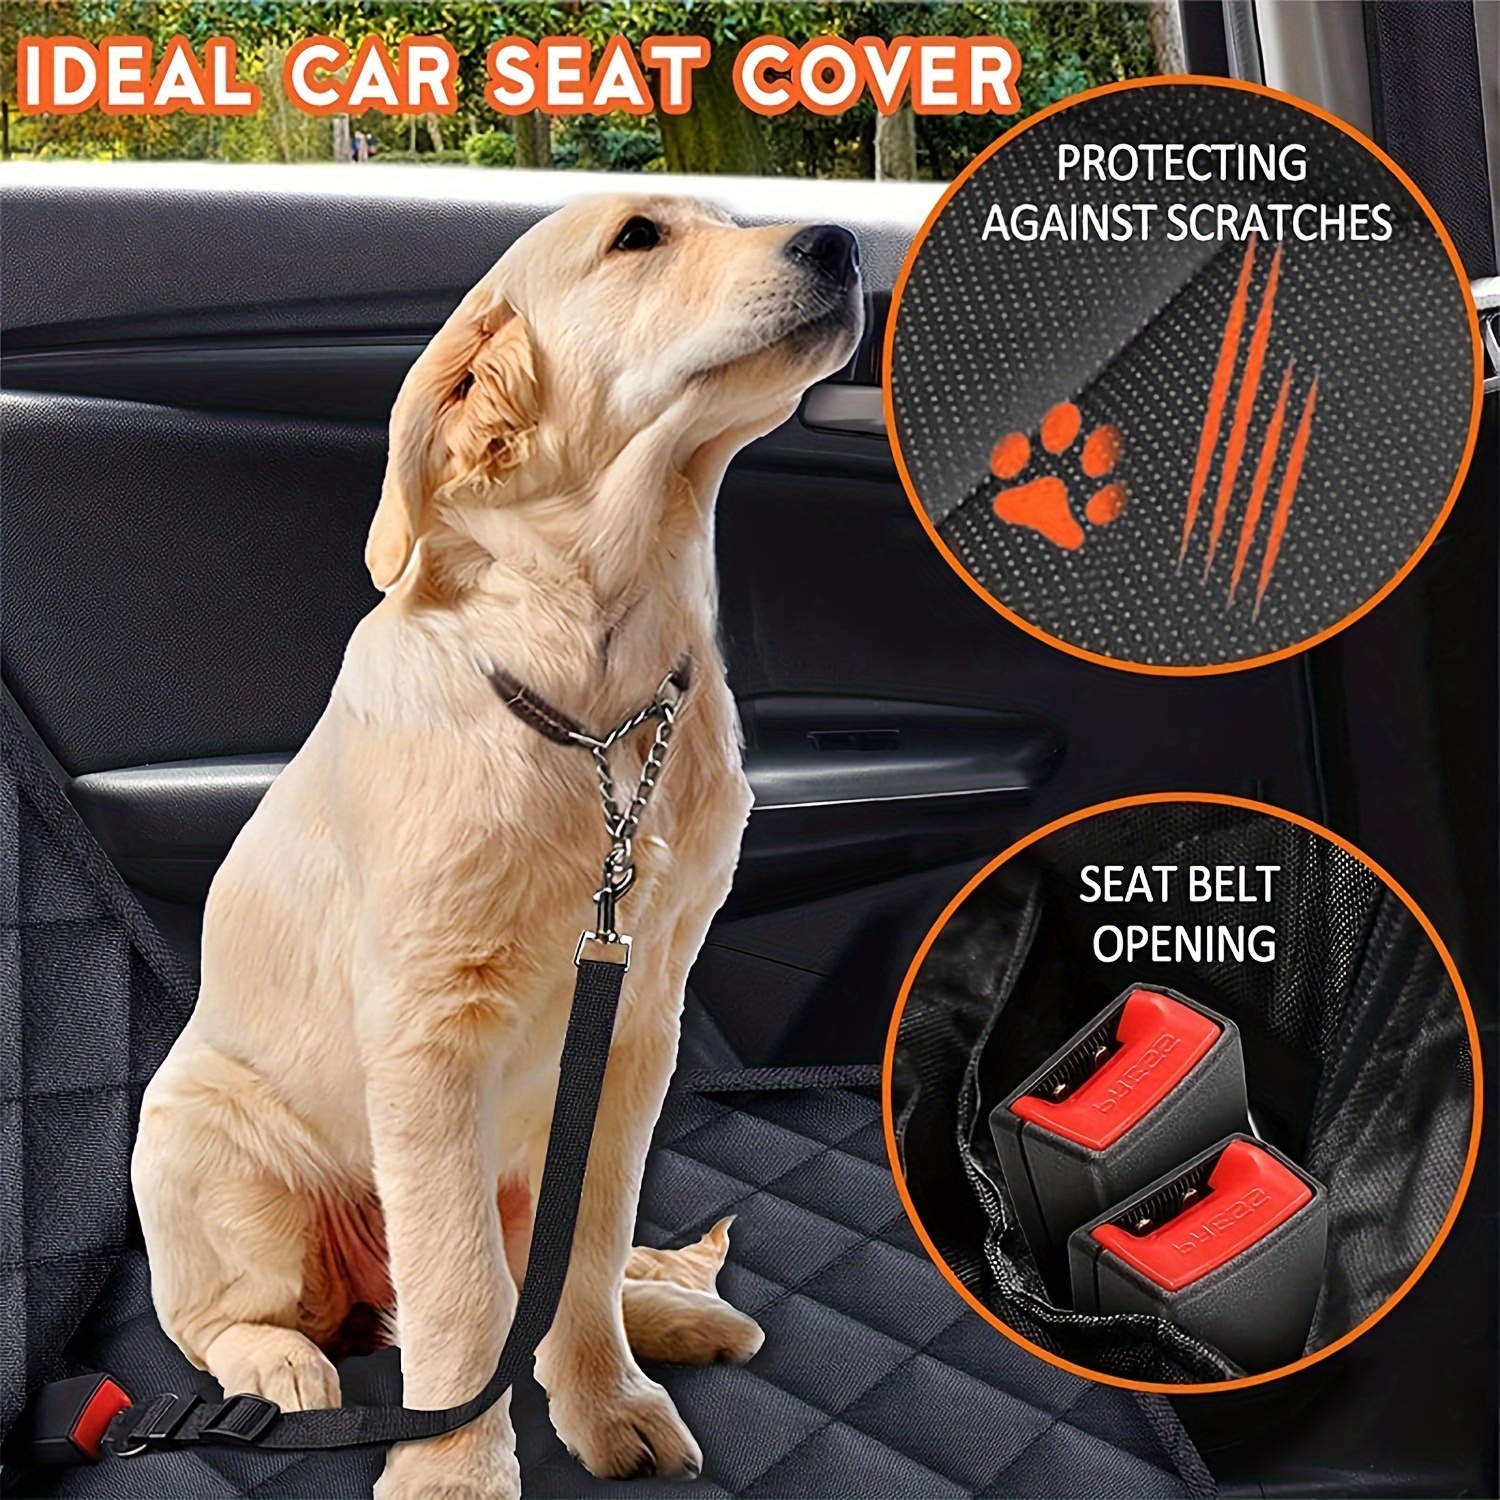 Active Pets Dog Back Seat Cover Protector - Waterproof, Nonslip Hammock for Dogs 